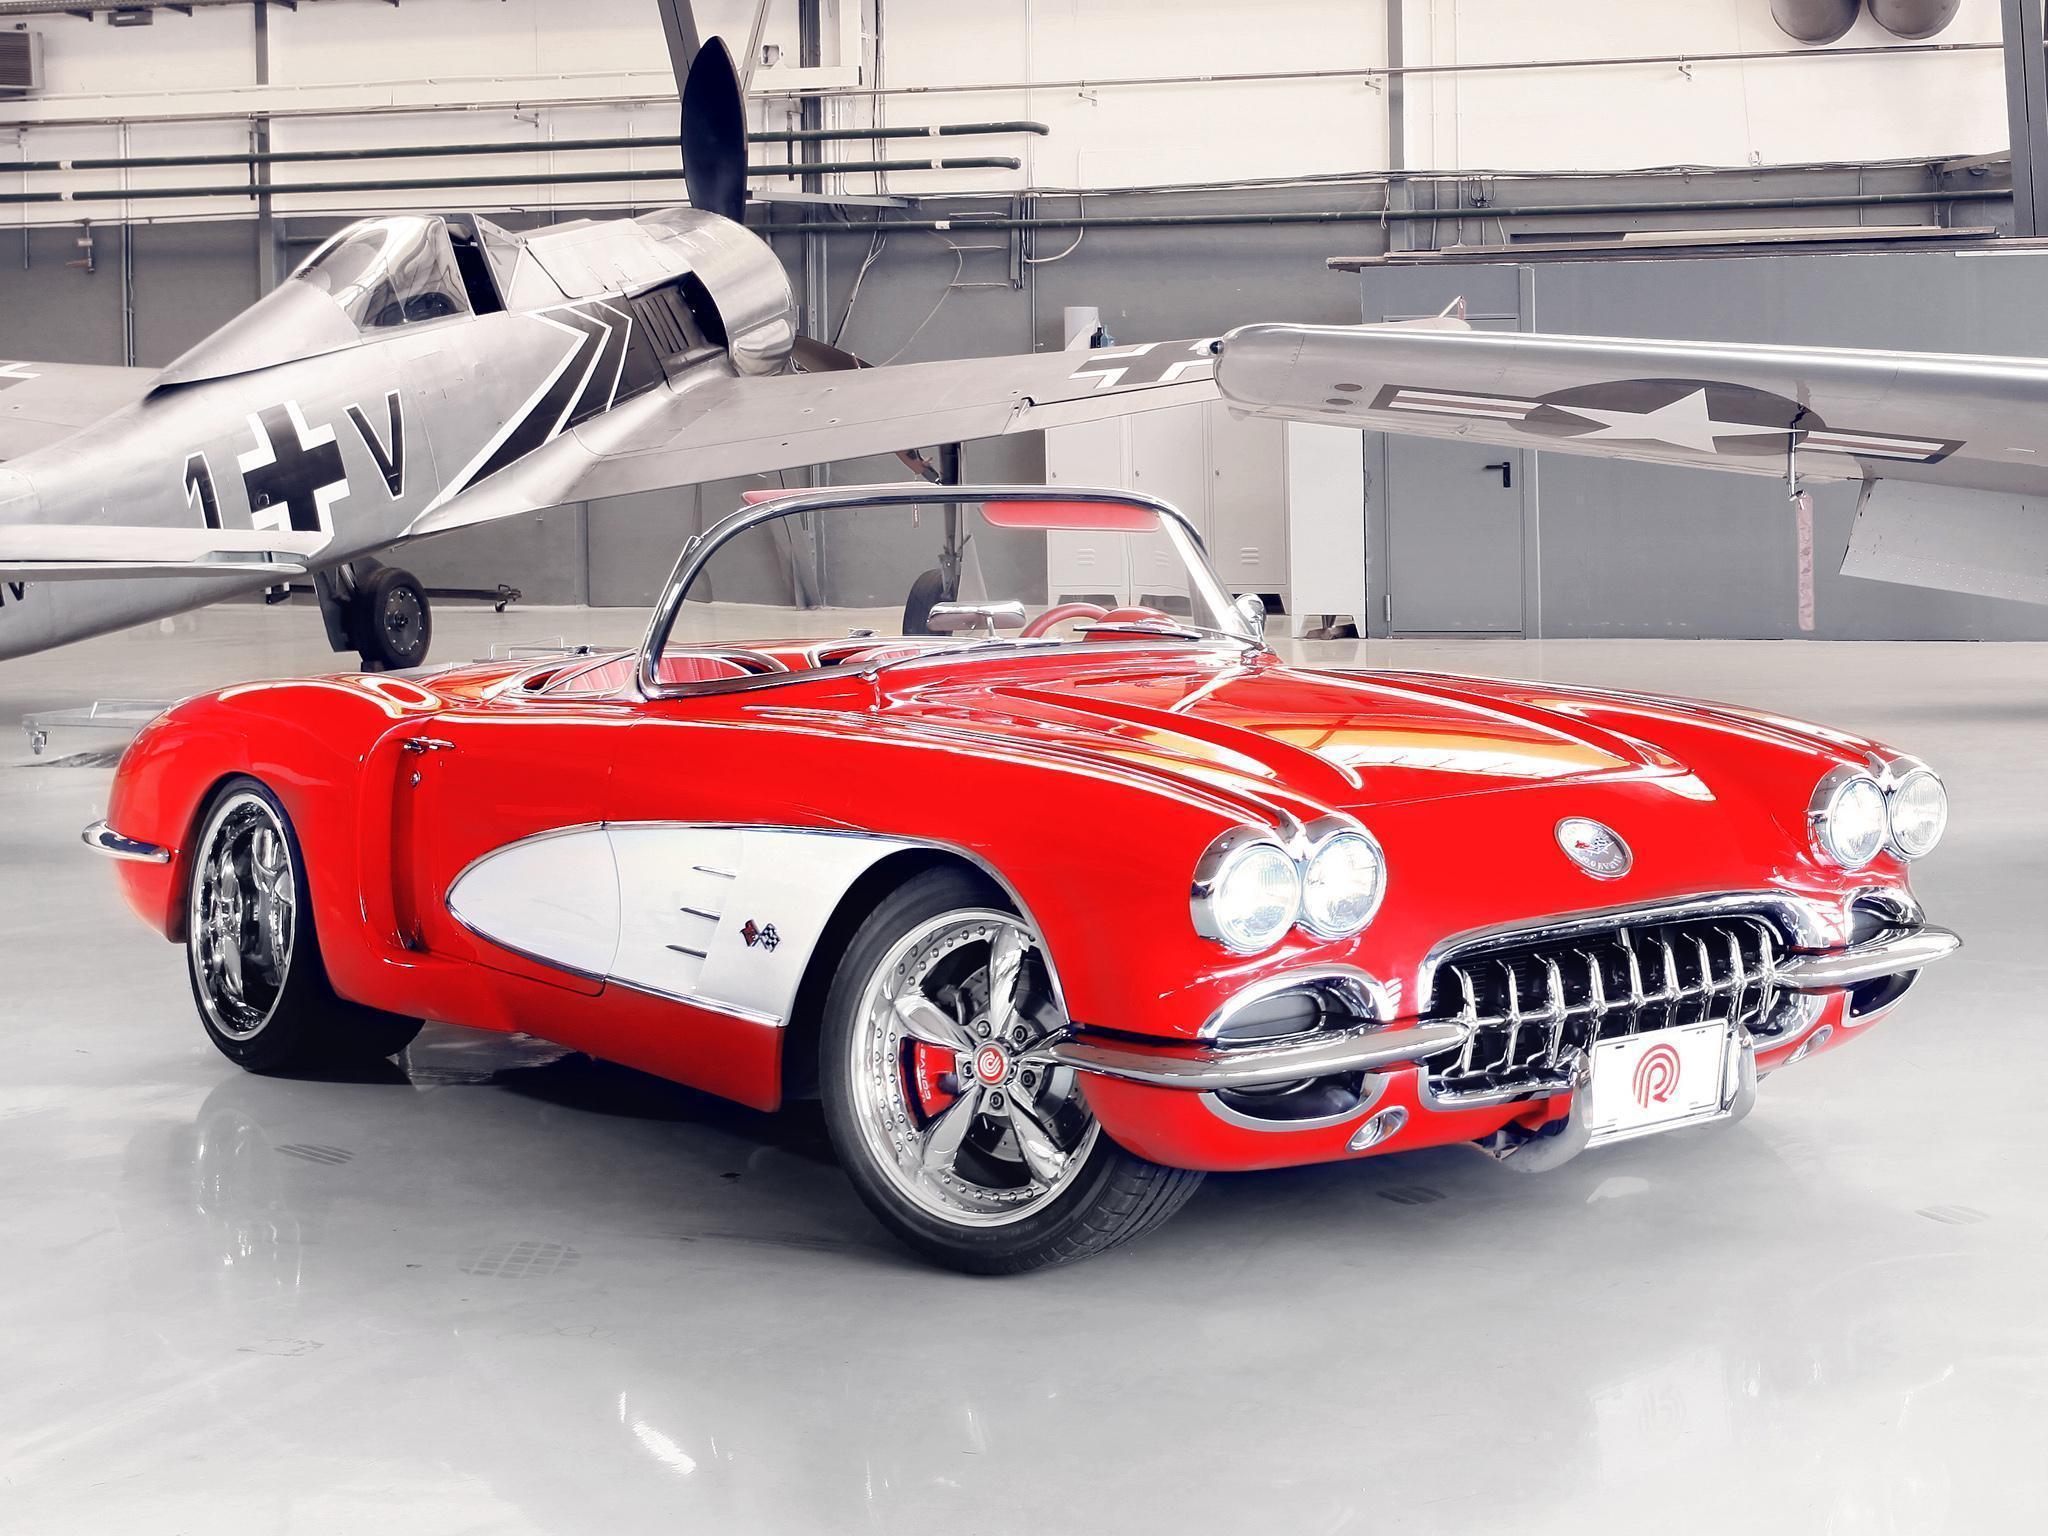 image For > Red 57 Chevy Wallpaper